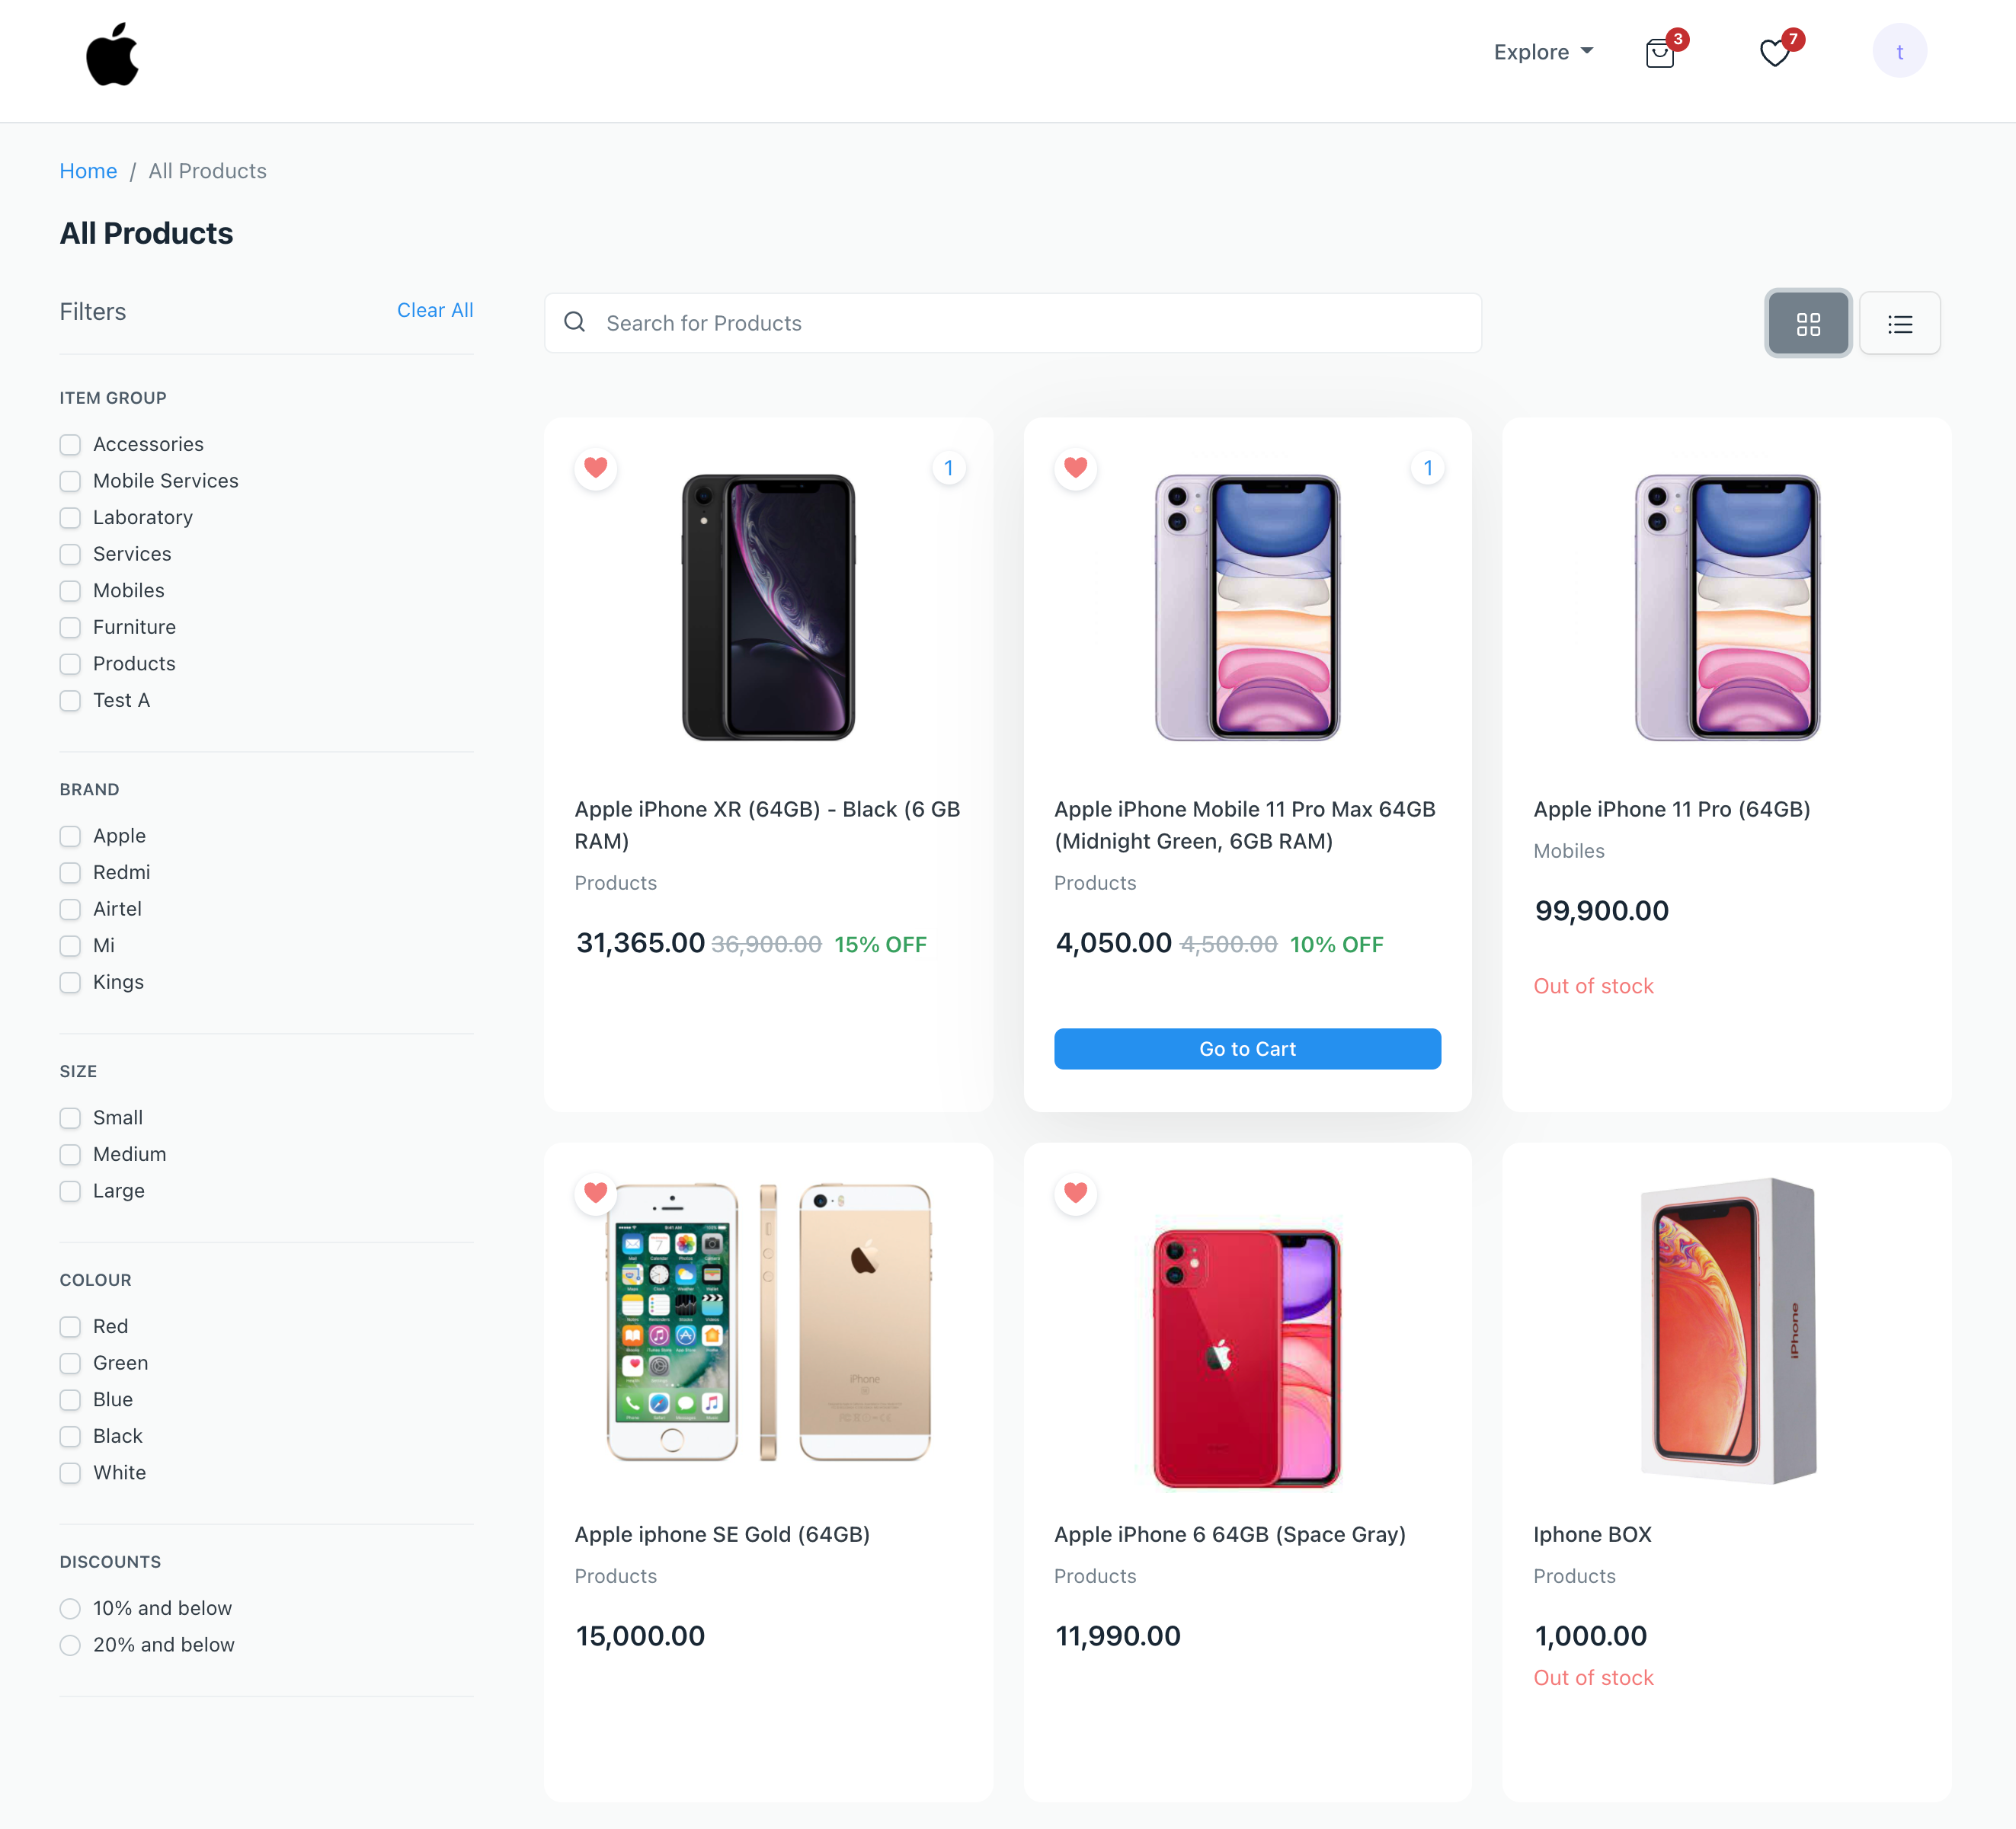 Product Grid View